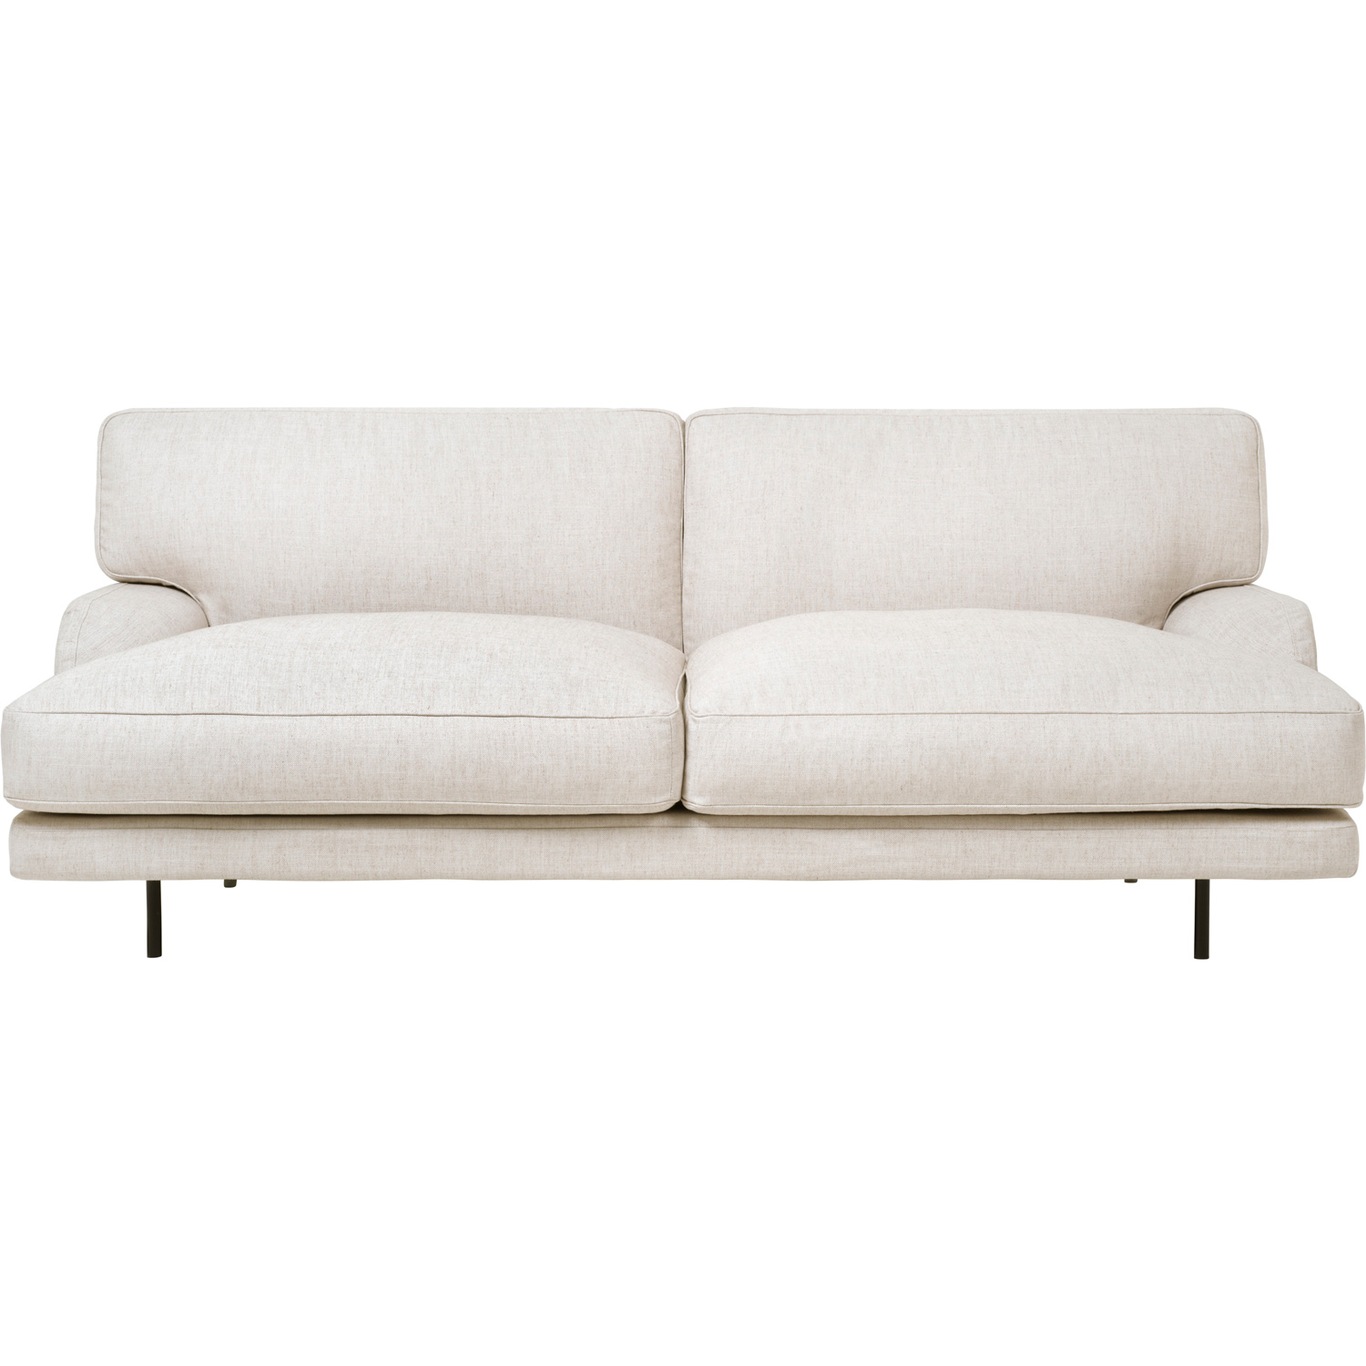 Flaneur Sofa FC 2,5-Pers, Ben Sort / Hot Madison 419 Off White